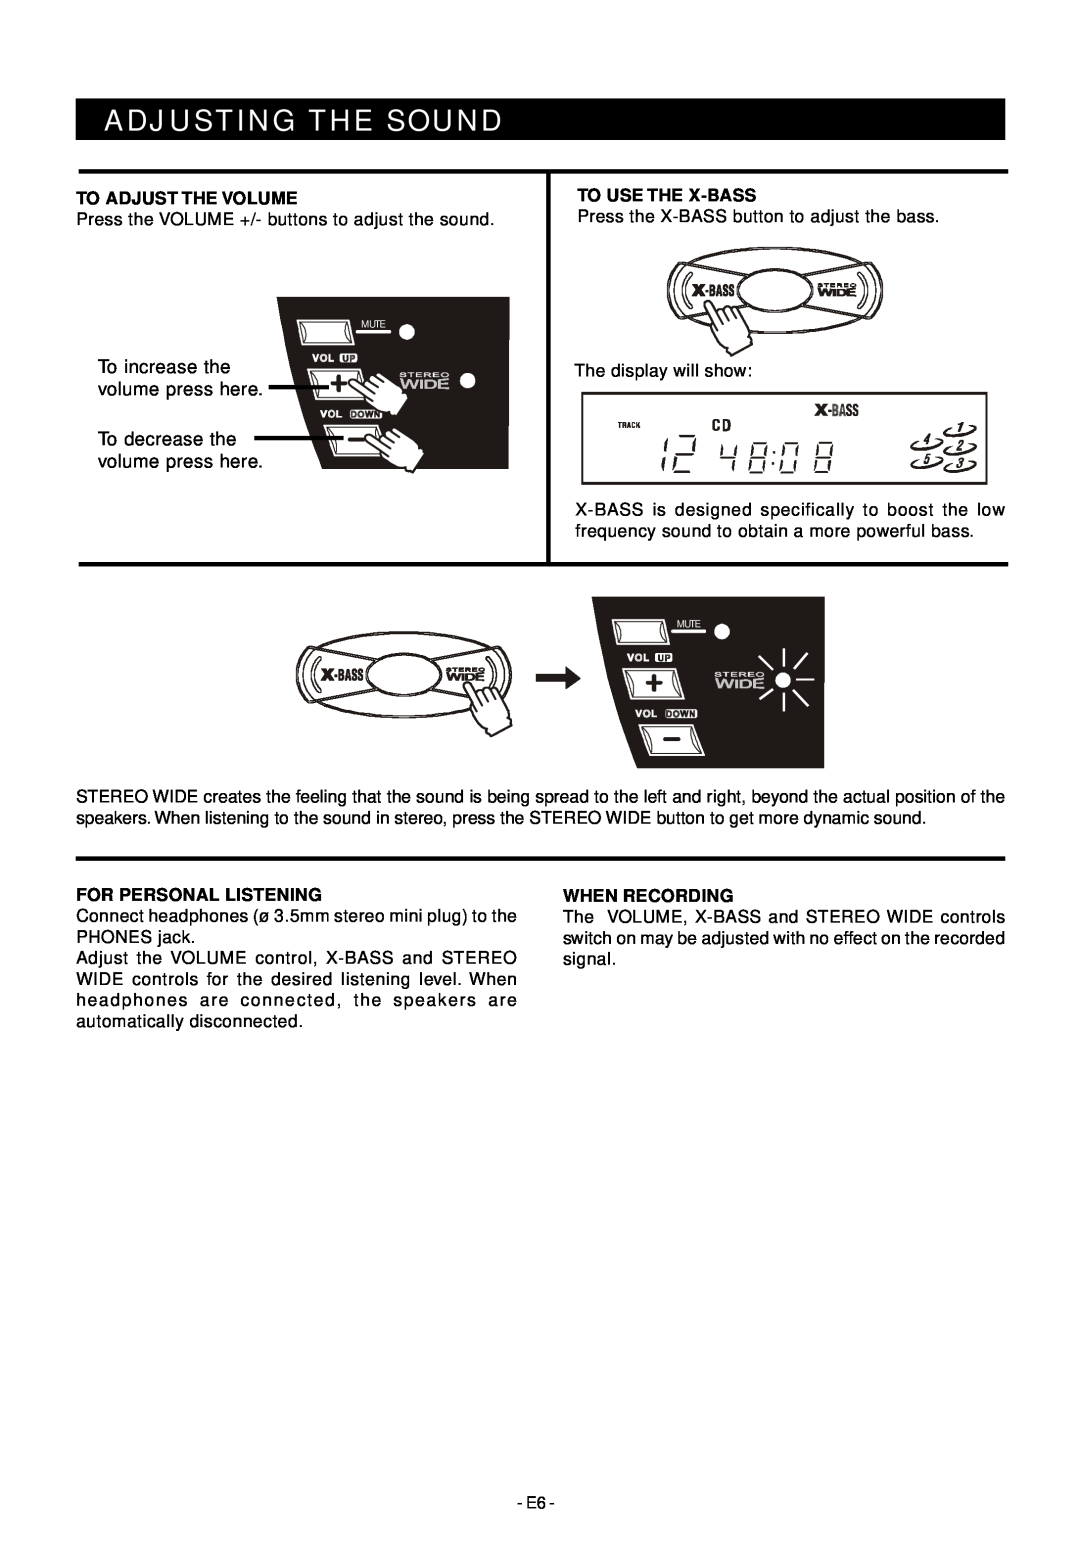 Audiovox Mini Hi-Fi System manual Adjusting The Sound, To Adjust The Volume, To Use The X-Bass, For Personal Listening 